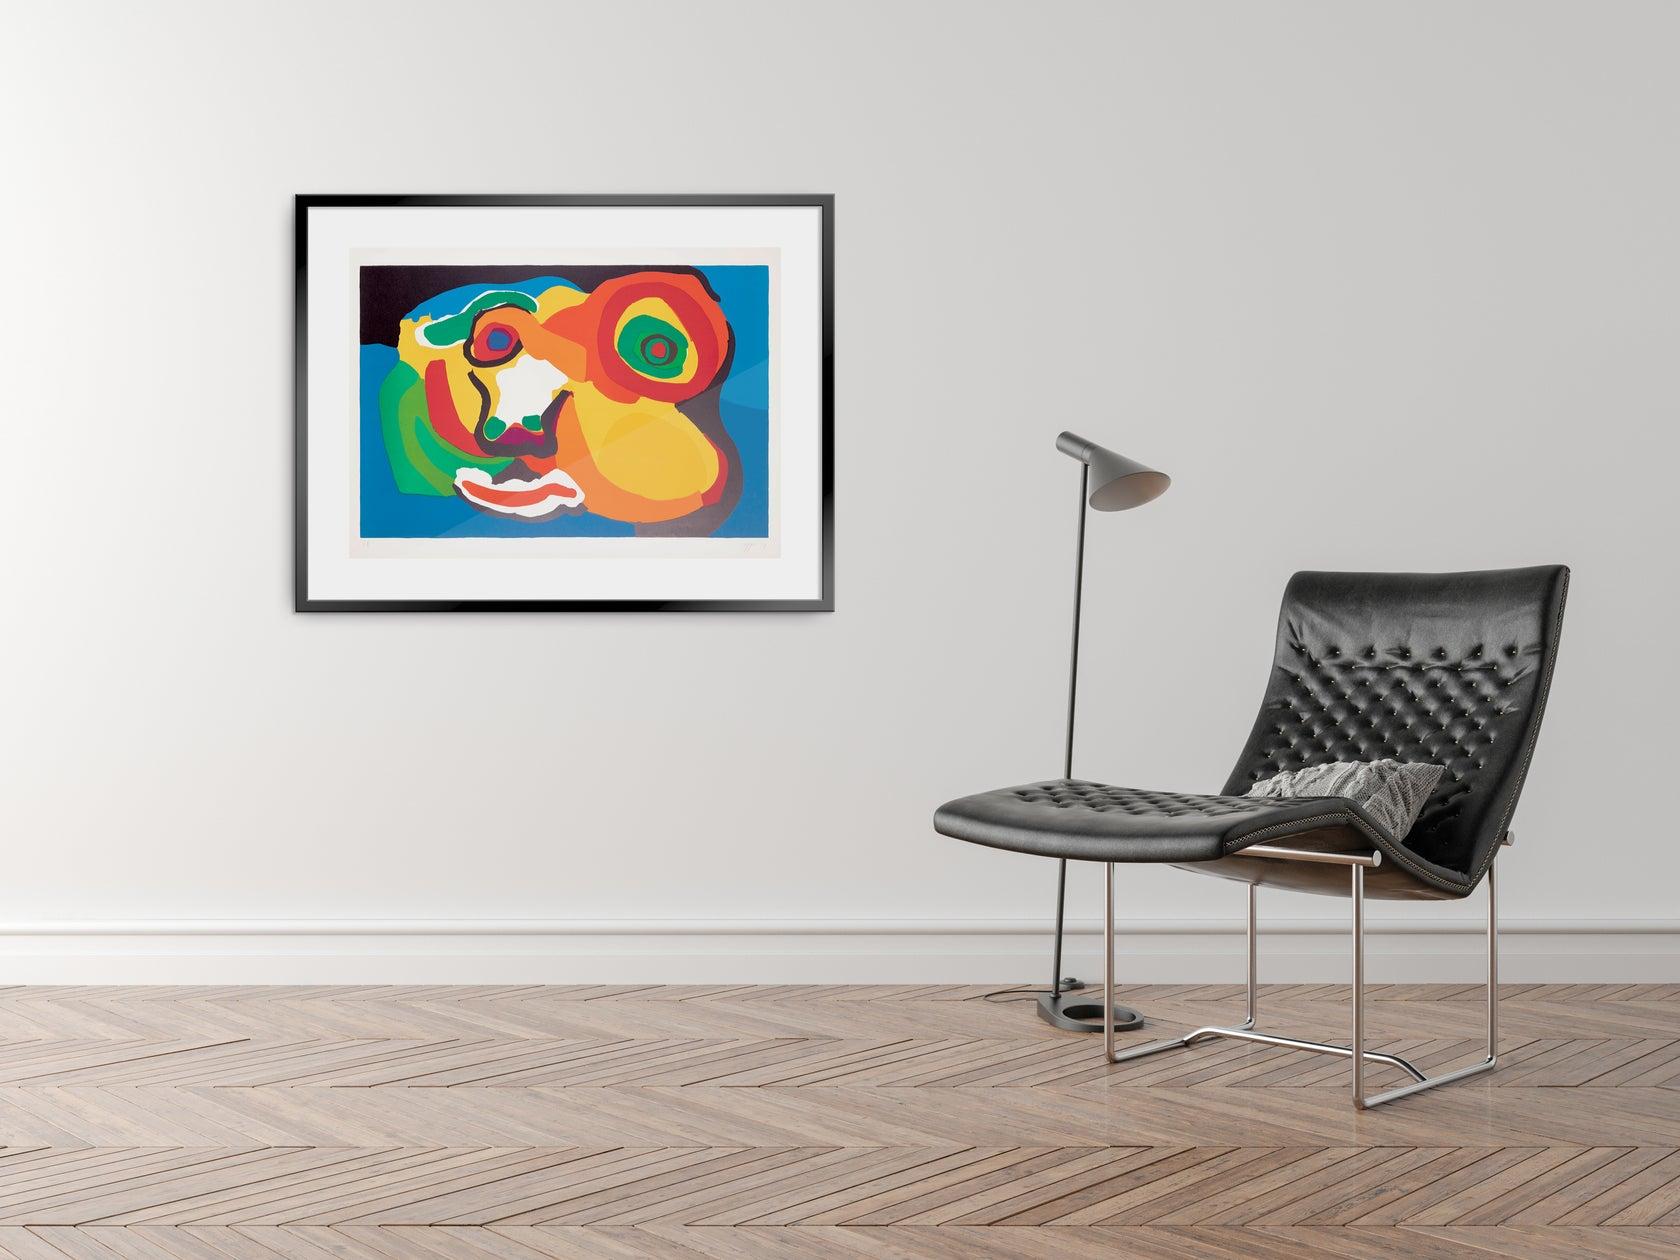 Artist: Karel Appel 

Medium: Original Lithograph, 1974 

Dimensions: 28 x 40 in, 71 cm x 101 cm

Arches Paper - Excellent Condition A+

This colorful and bright original lithograph by Appel is an artist proof and annotated 